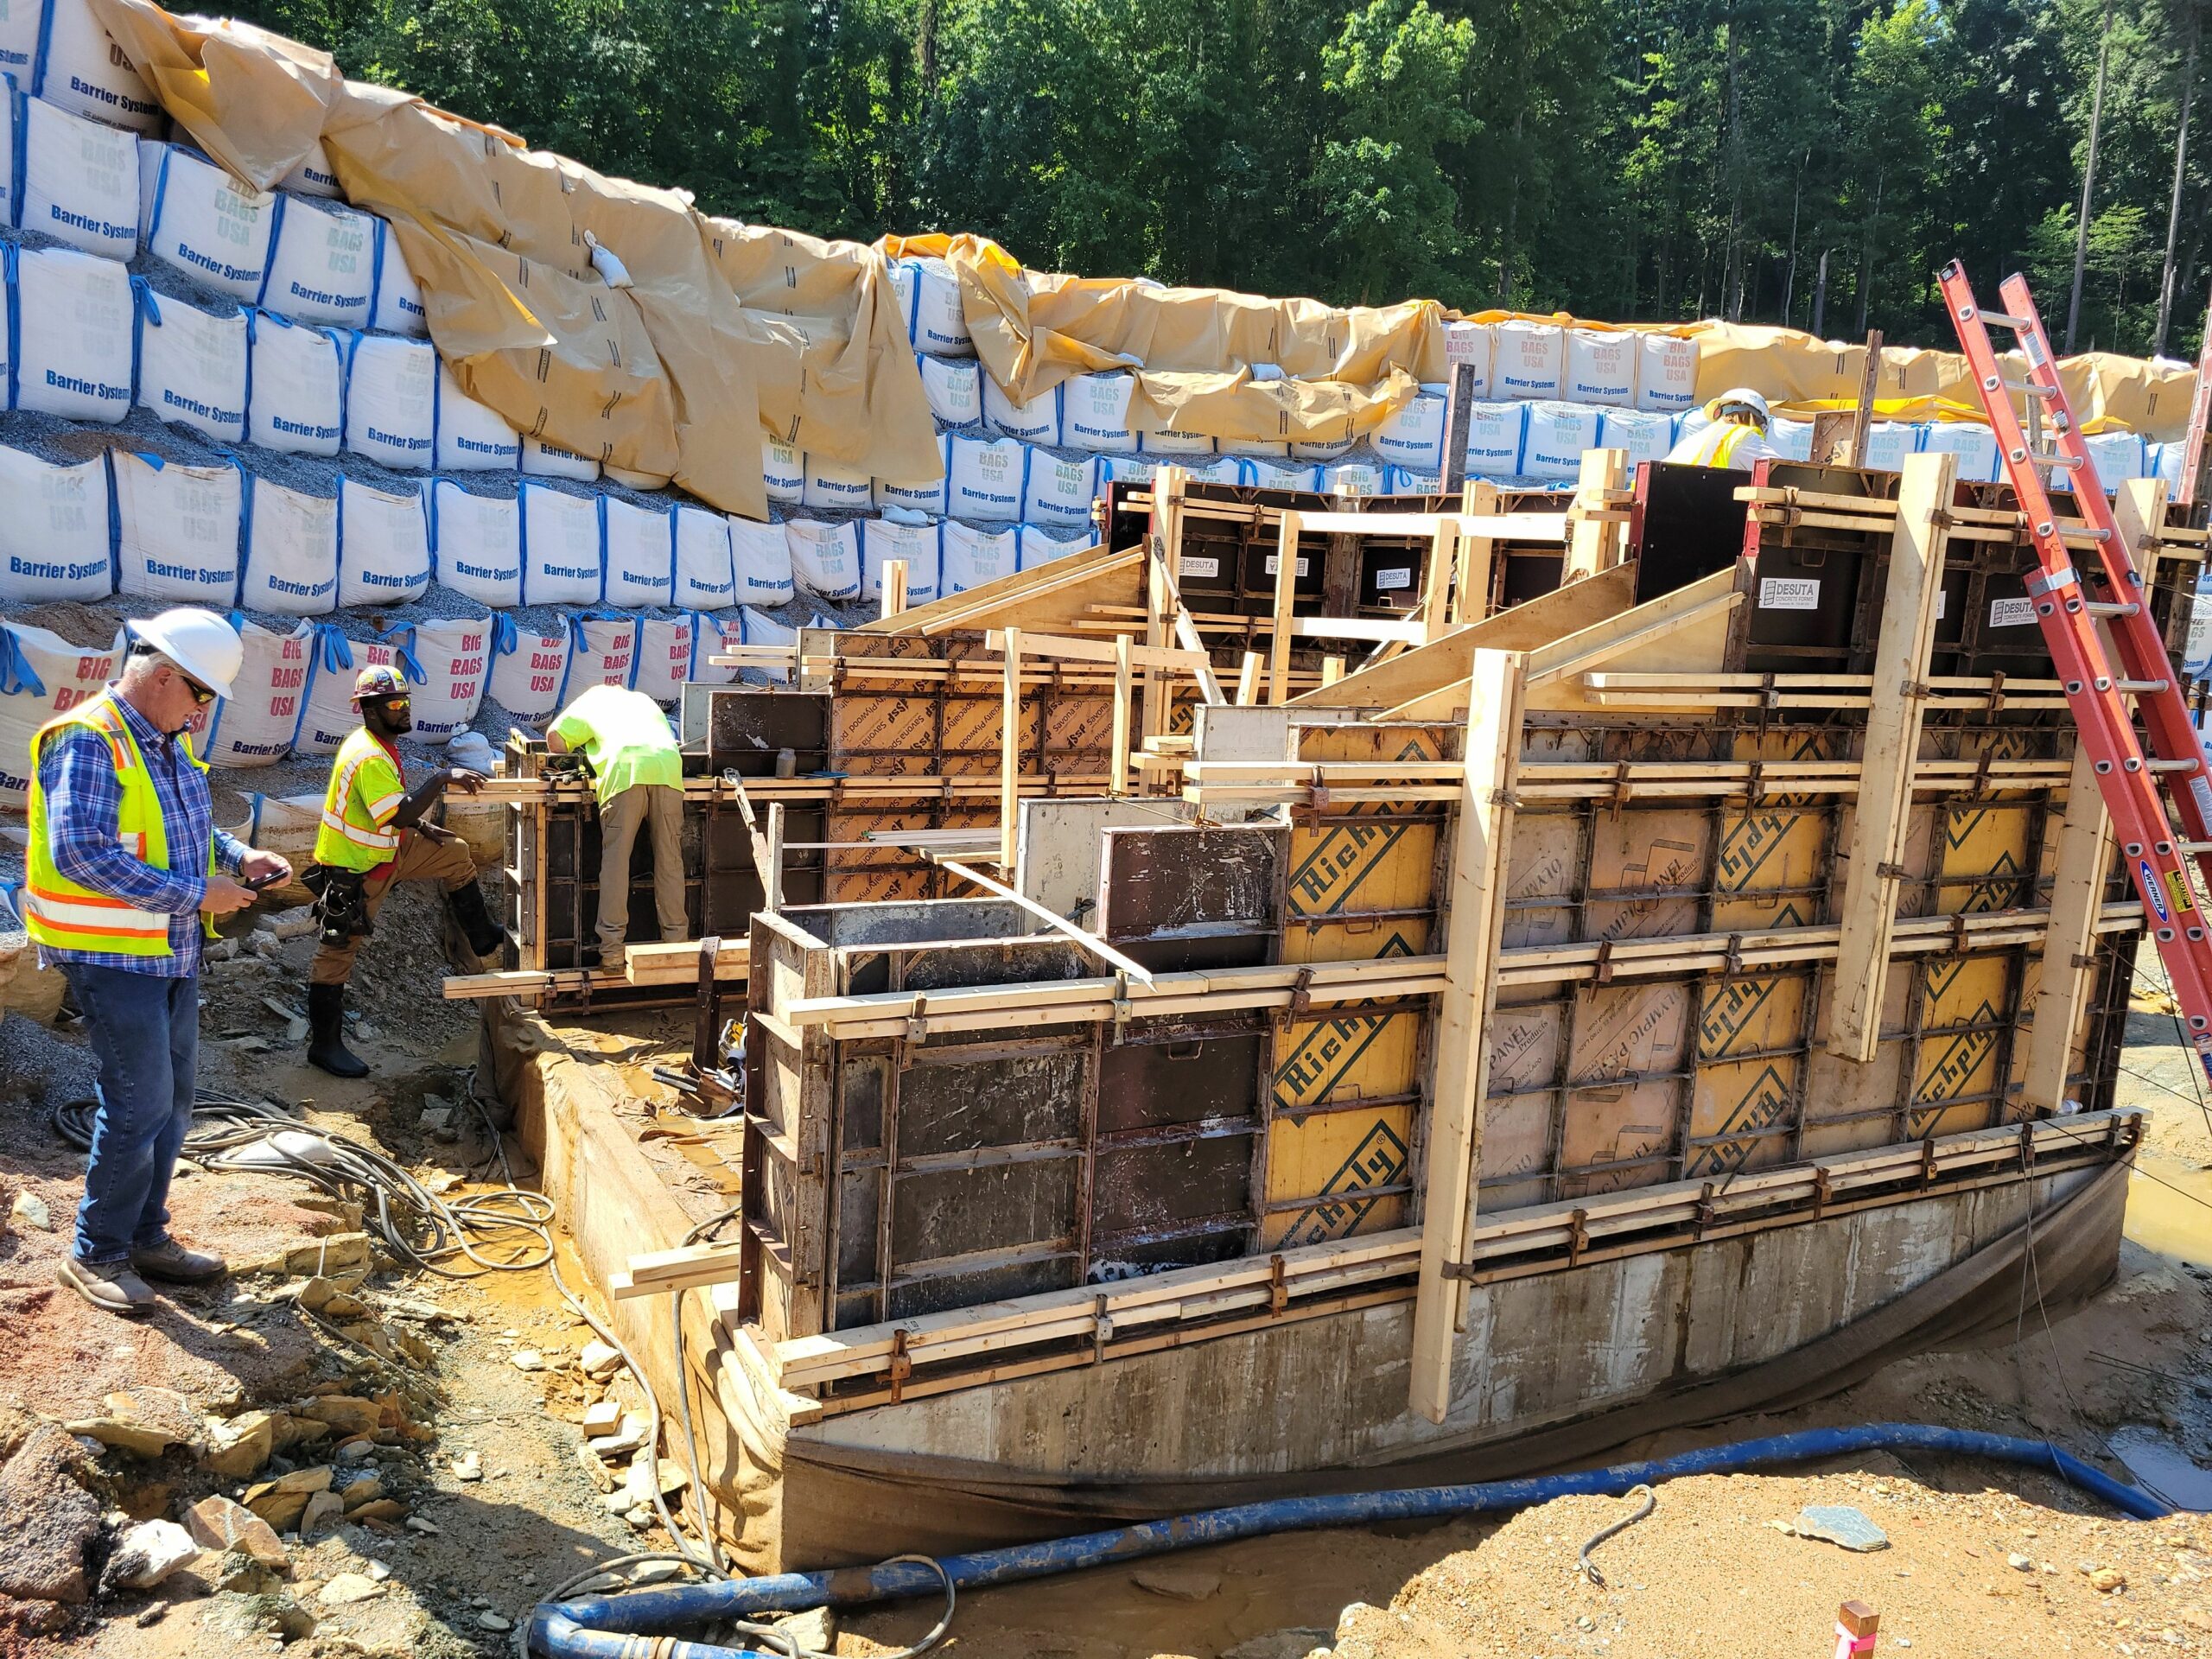 Work on the concrete foundations of the inlet and valve tower structures is being done, as well as removal of the earth from the left side of the downstream embankment. Pictured above is the 48″ diameter inlet pipe structure that is being formed on the bottom of the reservoir.